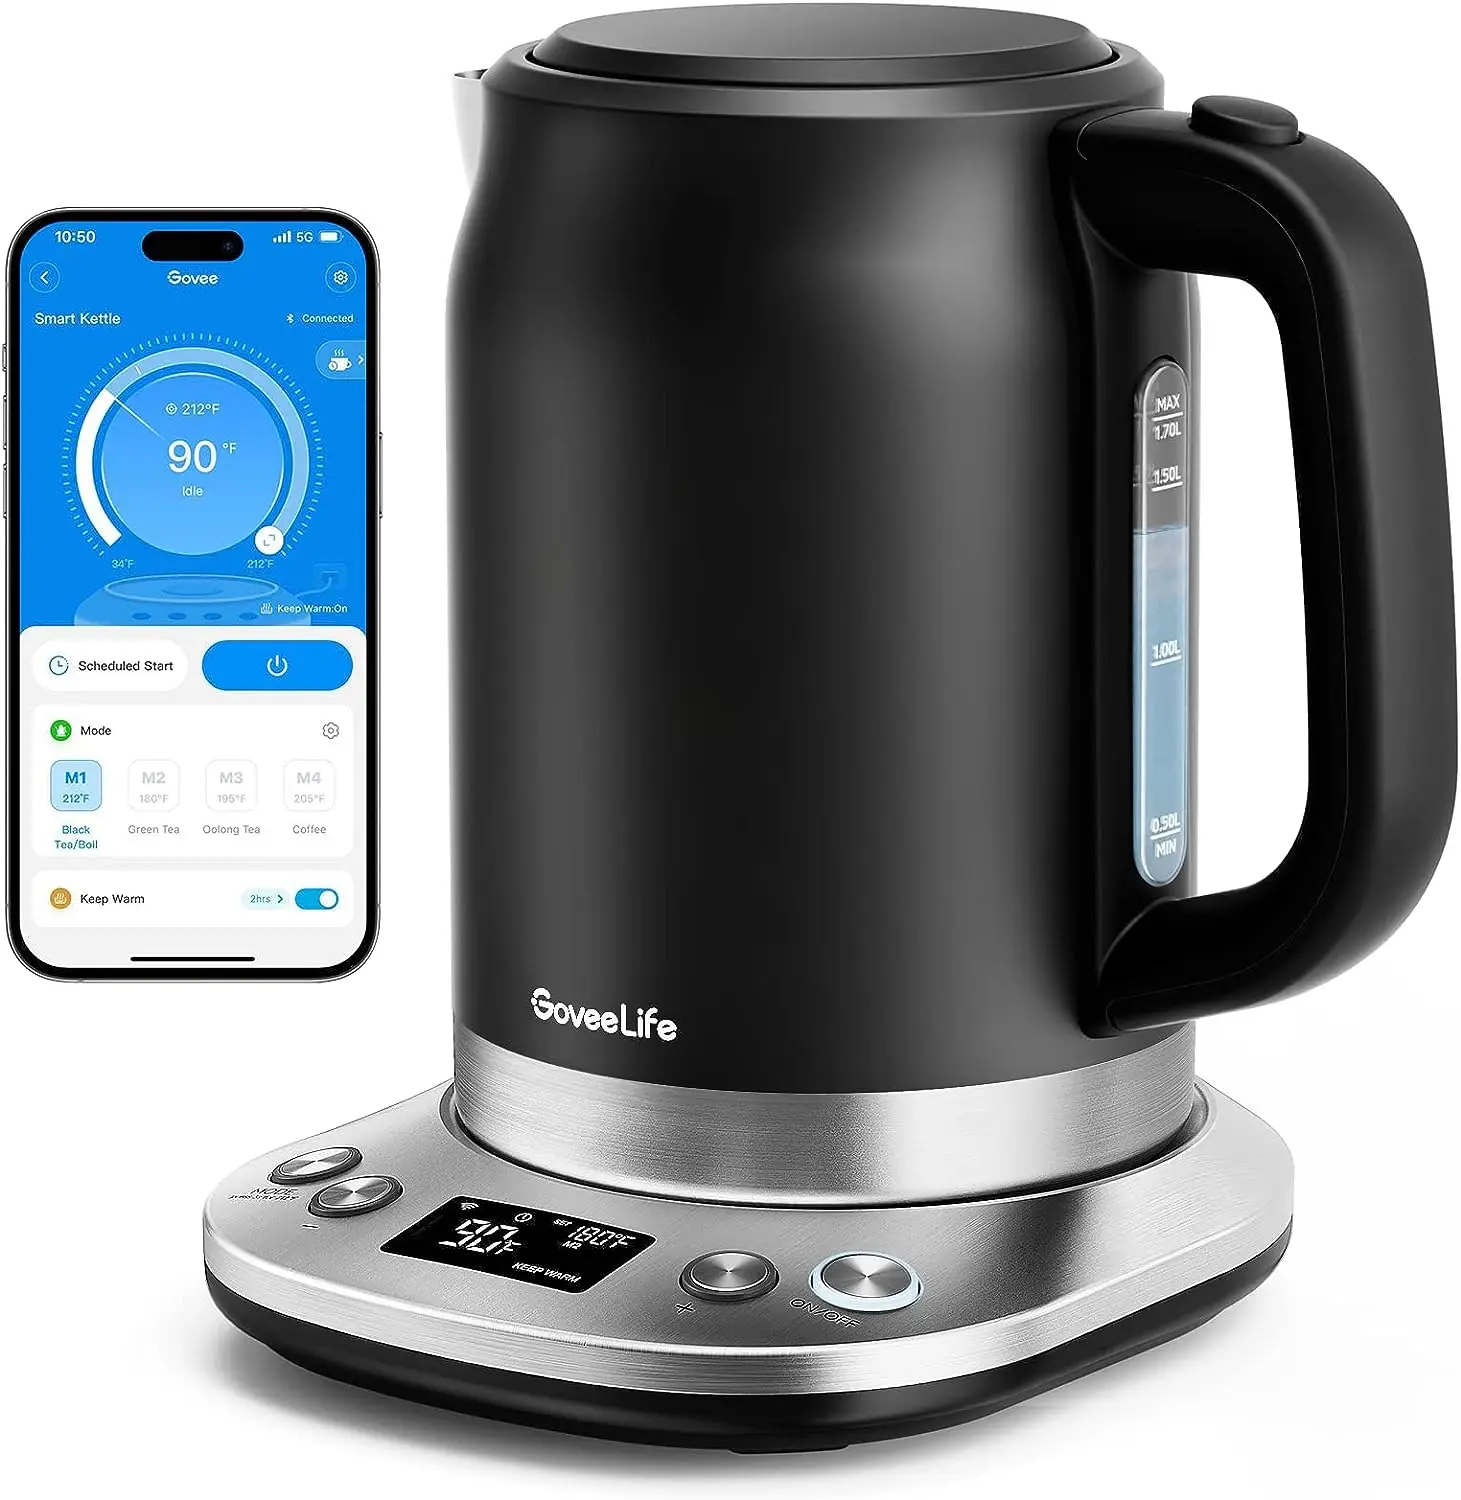 

Smart Kettle Temperature Control, WiFi Tea Kettle with Alexa Control, 1500W Rapid Boil, 2H Keep Warm, 1.7L BPA Free Stainless